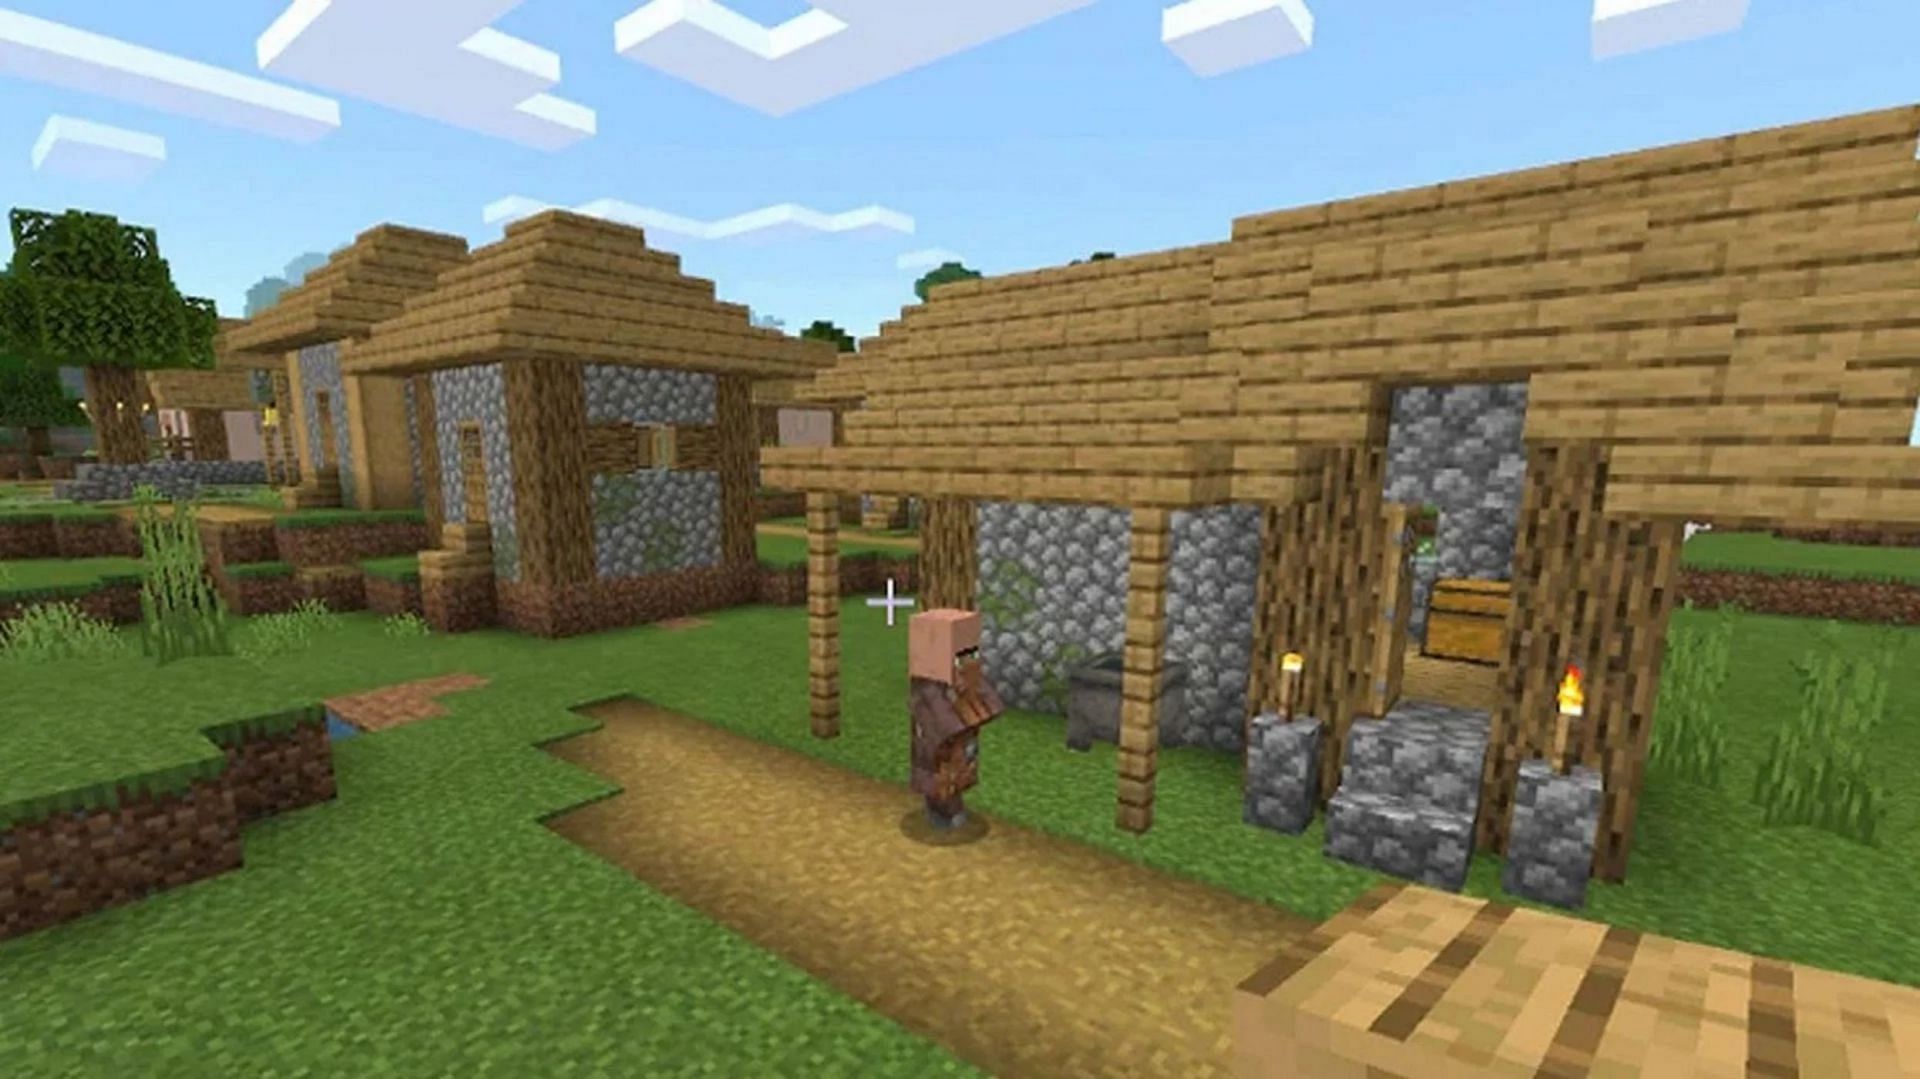 Another village seed, but one worthy of speedrunning on (Image via Mojang)